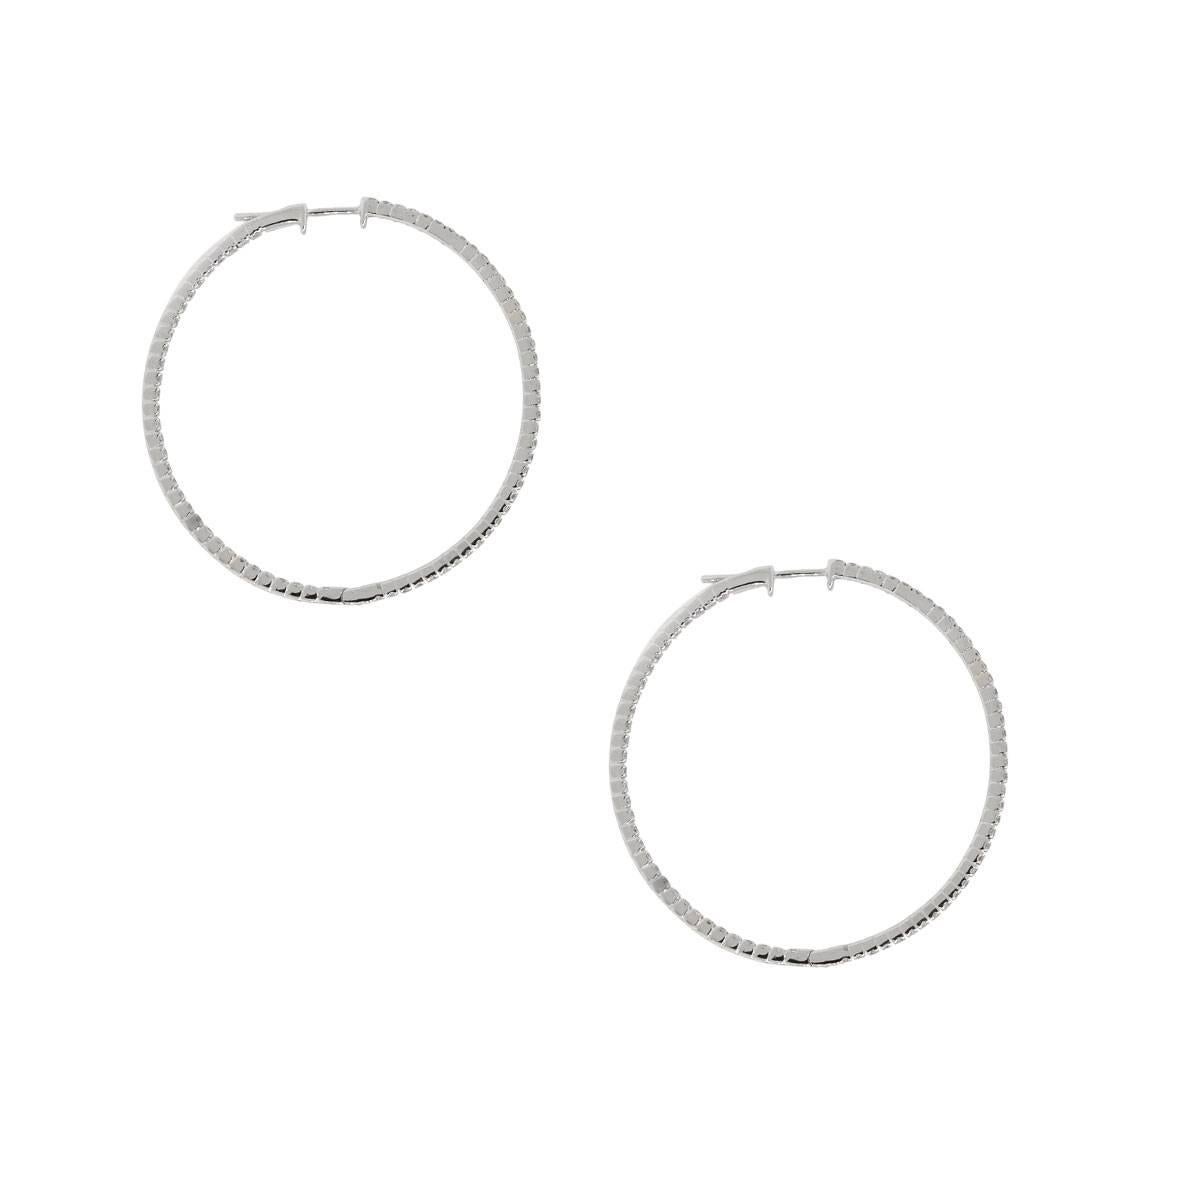 Material: 14k white gold
Style: Diamond inside out hoop earrings
Diamond Details: Approximately 1.04ctw of round brilliant diamonds. Diamonds are G/H in color and S1 in clarity
Earring Measurements: 1.56″ x 0.05″ x 1.56″
Total Weight: 5.2g